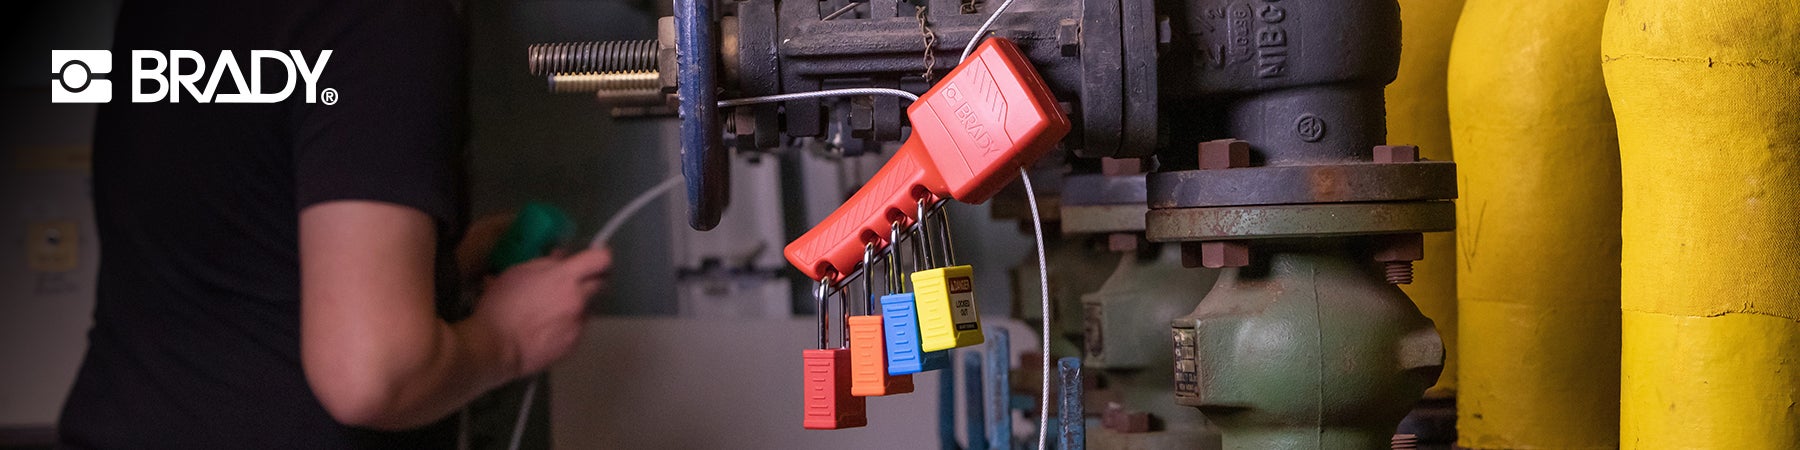 Brady - Safety Lockout Padlocks: Reliable lockout security at a price you’ll love